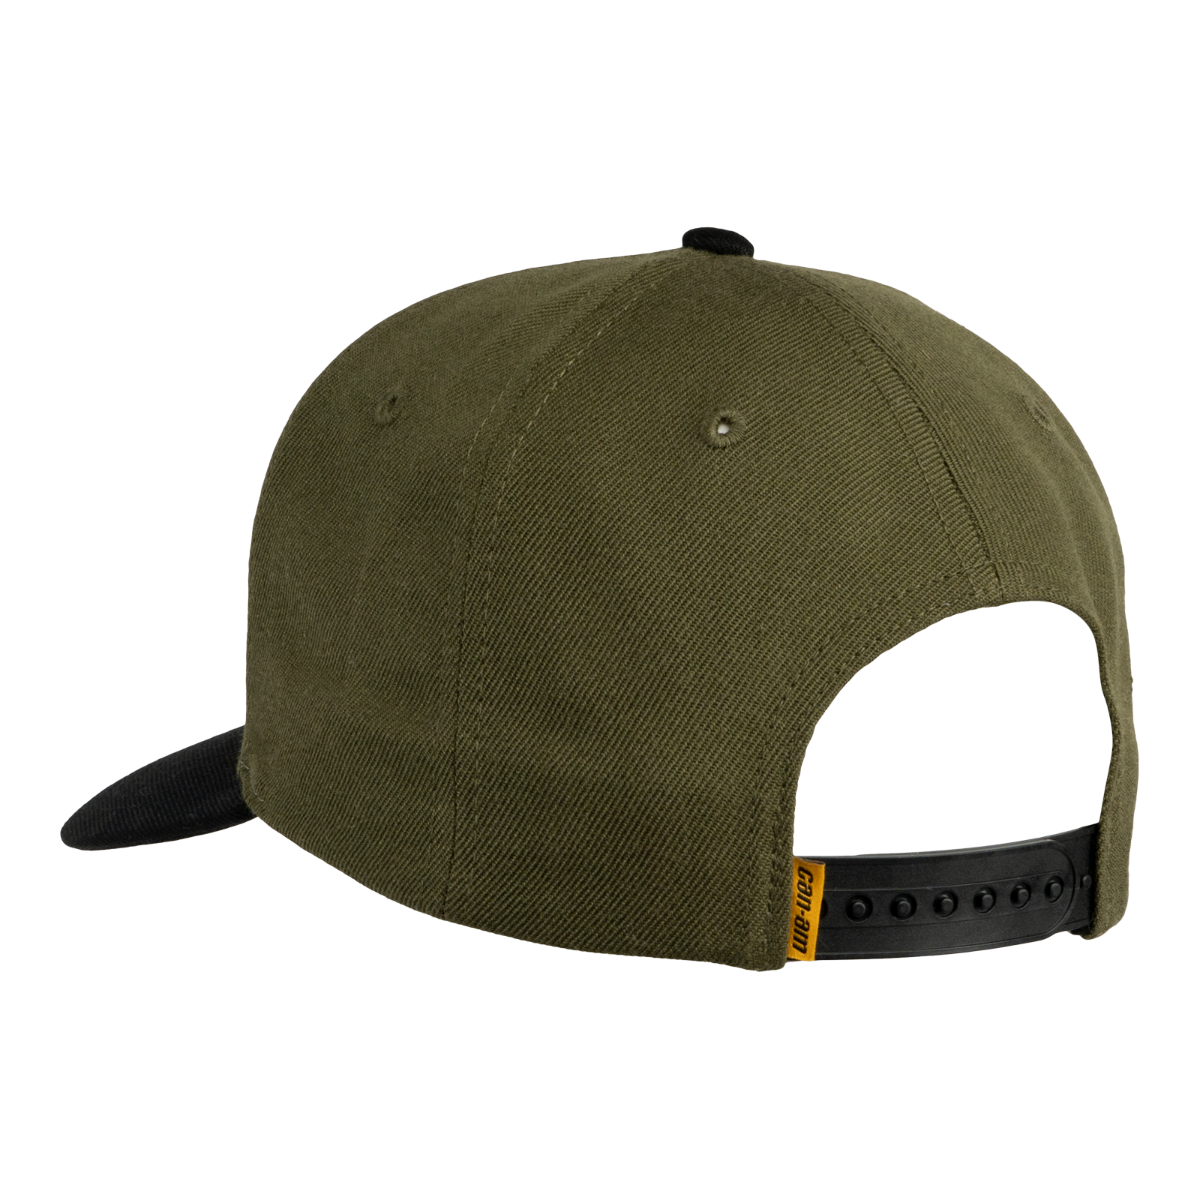 Can-Am Men's Curved Cap